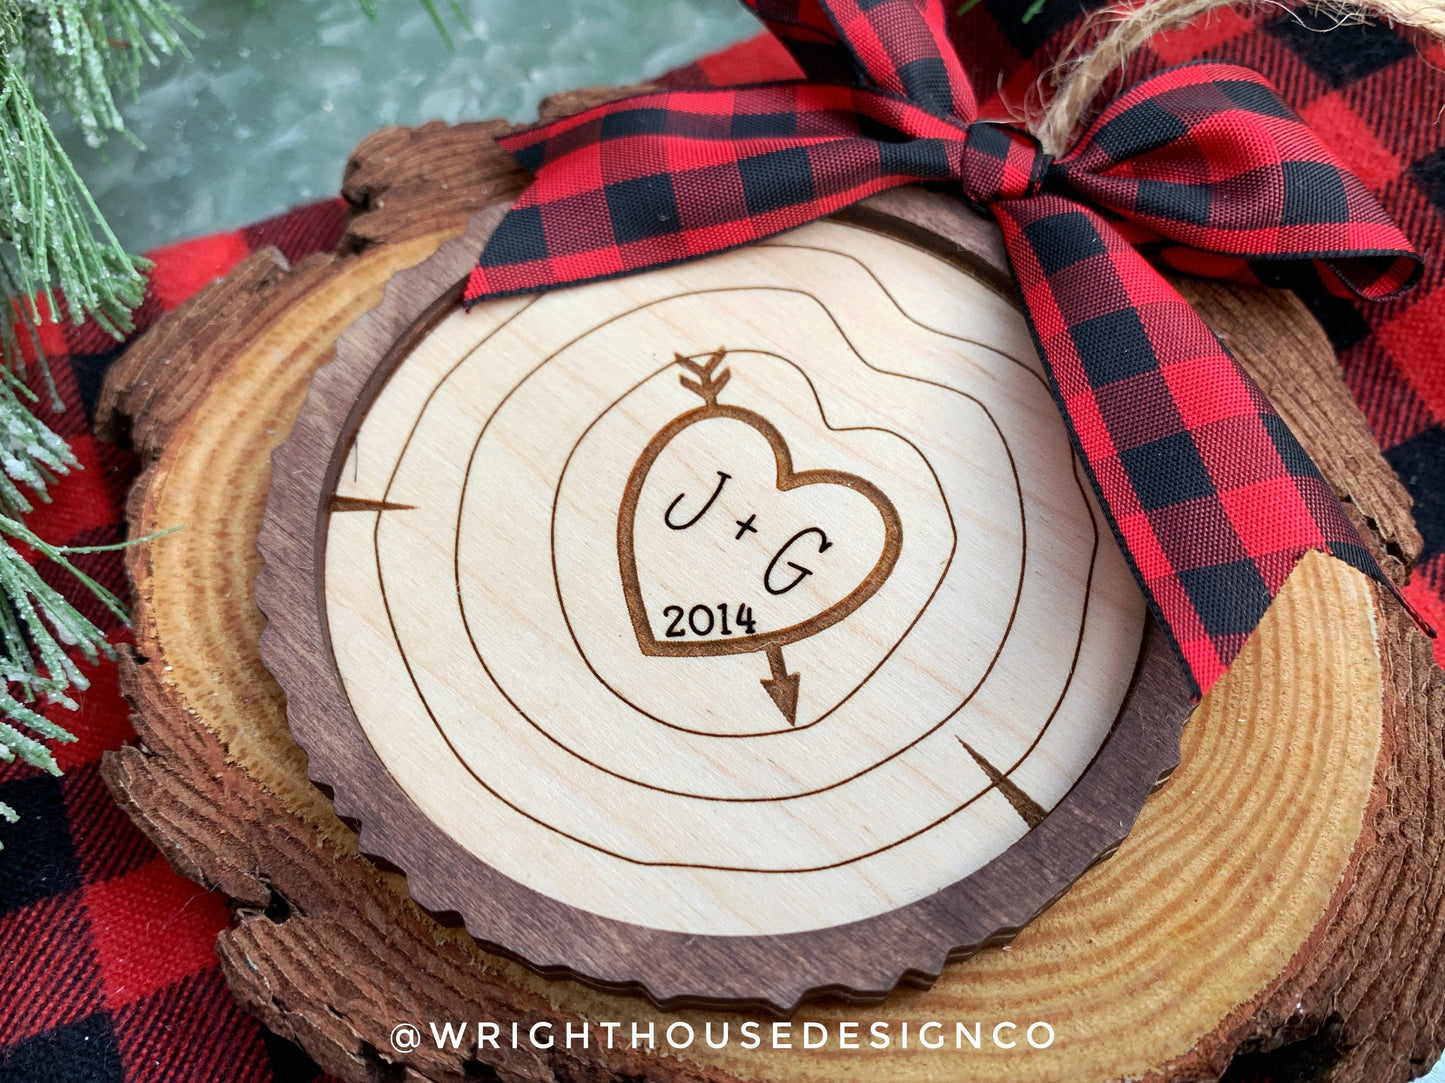 Carved Initial Wood Slice Rustic Christmas Ornaments - Score and Engraved Personalizable - Cut File For Glowforge Lasers - Digital SVG File